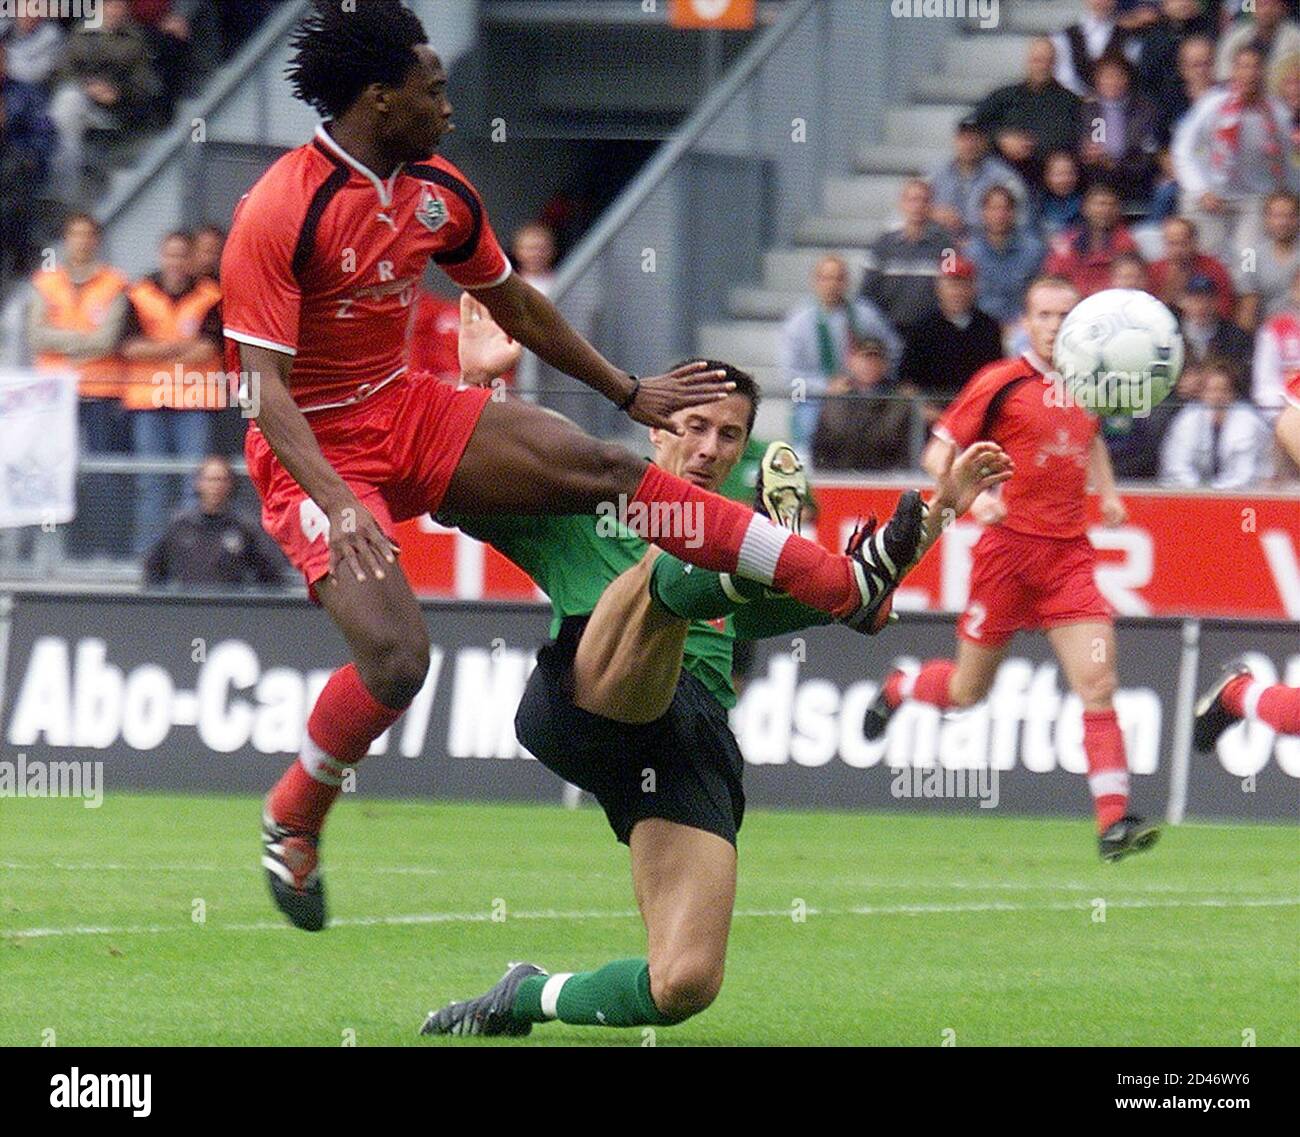 Jacob Lekcetho (L) of Lokomotiv Moskau and Radoslav Gilewicz of FC Tirol  Innsbruck fight for the ball during their replay or the Champions League  third qualification round second leg match in Innsbruck